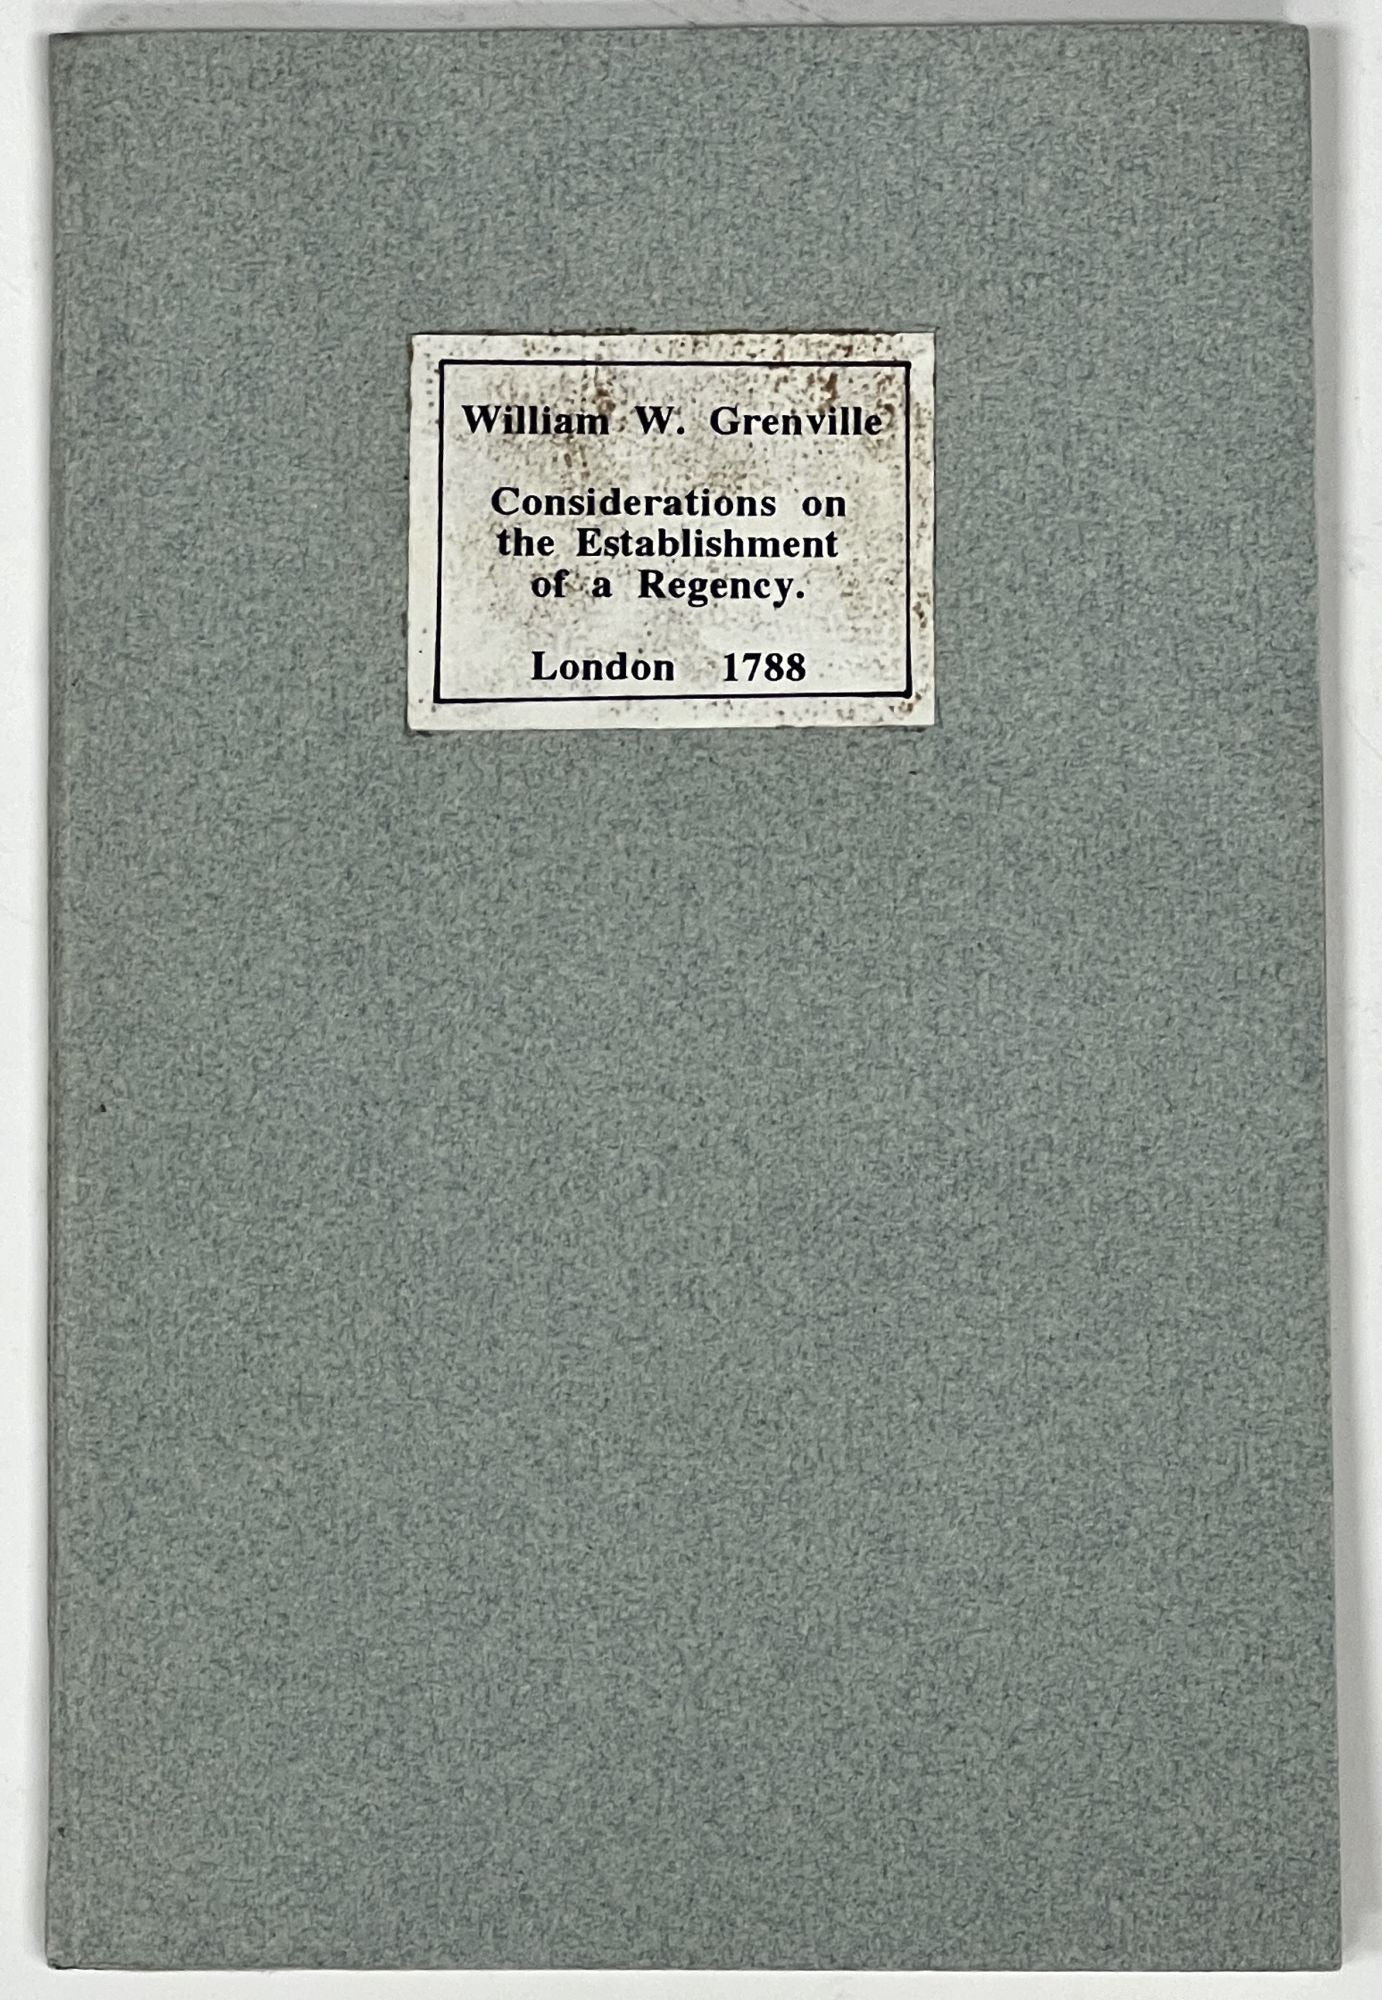 [Grenville, William Wyndham, Baron. 1759 - 1834] - CONSIDERATIONS On The ESTABLISHMENT Of A REGENCY; With an Appendix: Containing Proceedings Relative to the Settling the Form of Government During the Minority of Henry VI. and During the King Being Disqualified by Infirmities